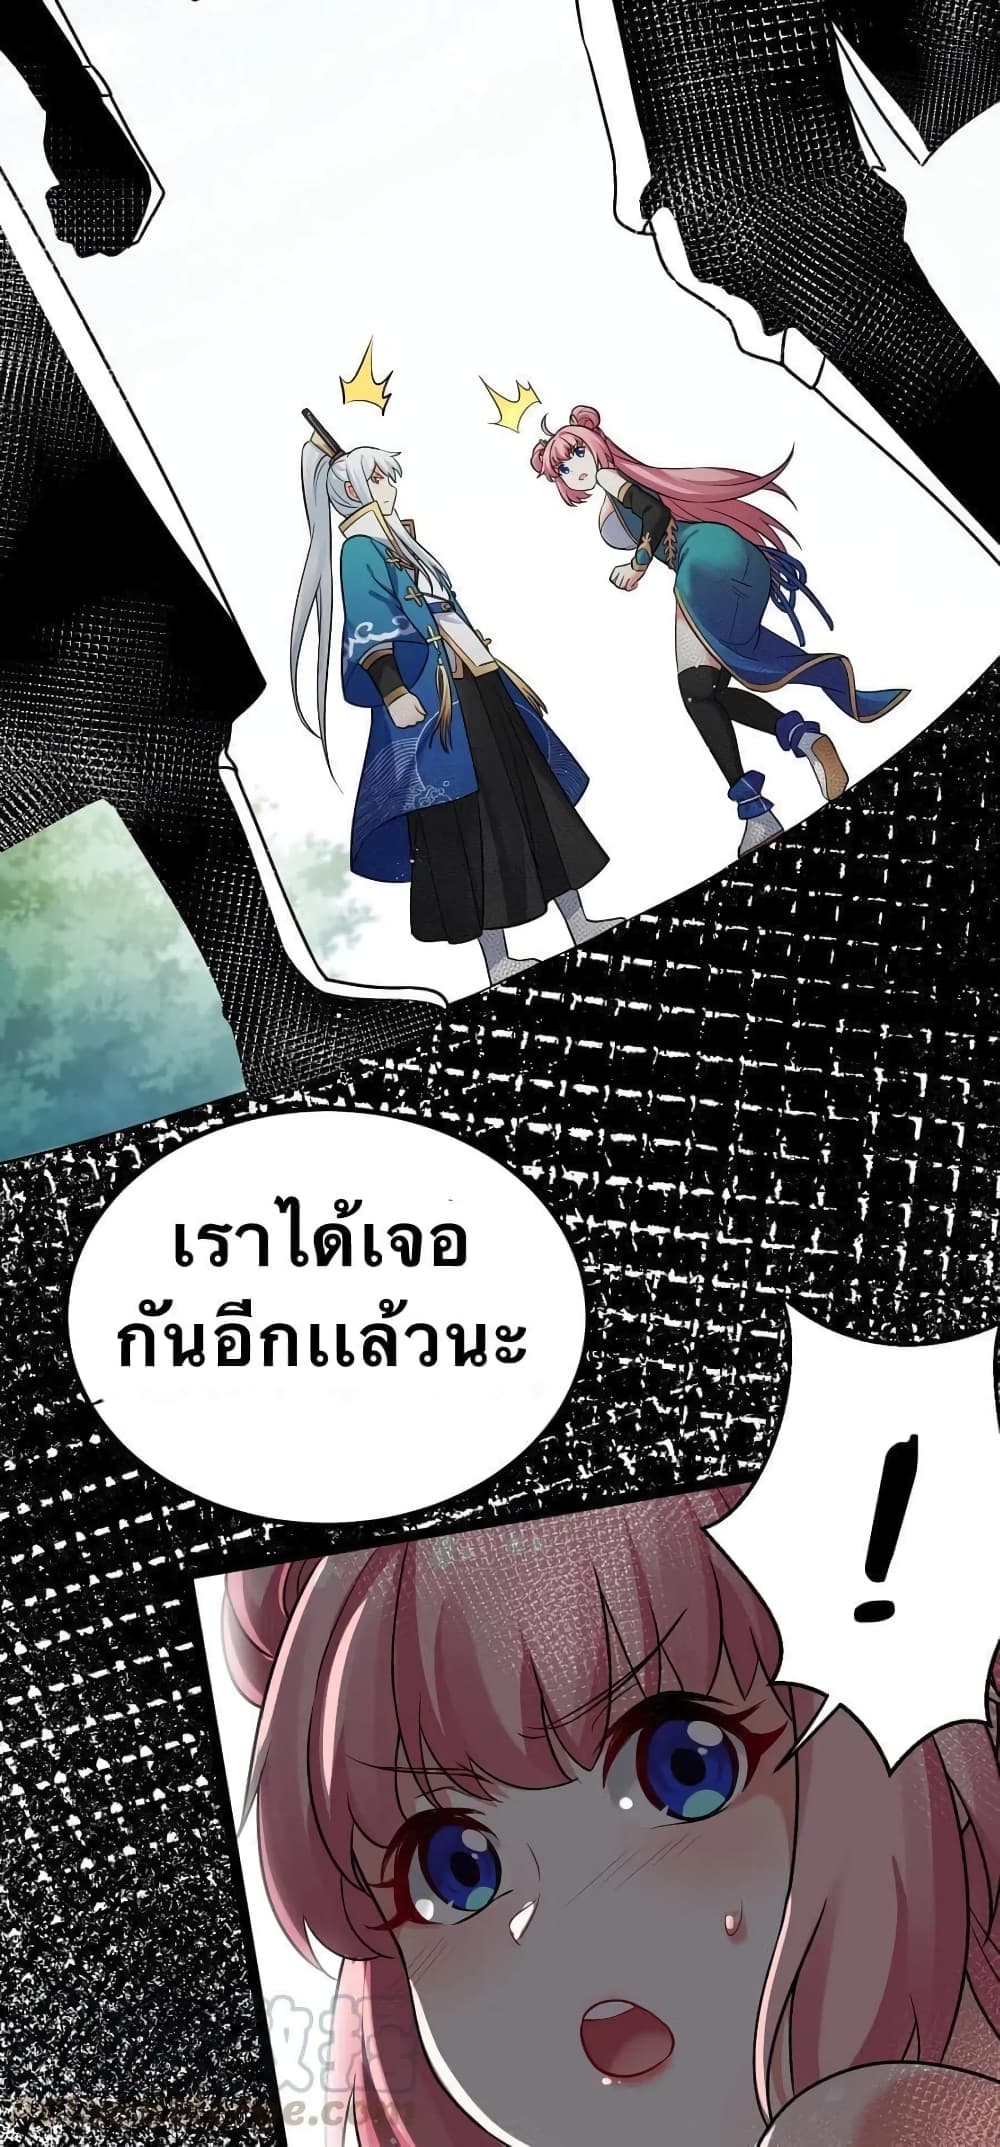 Godsian Masian from Another World 10 แปลไทย